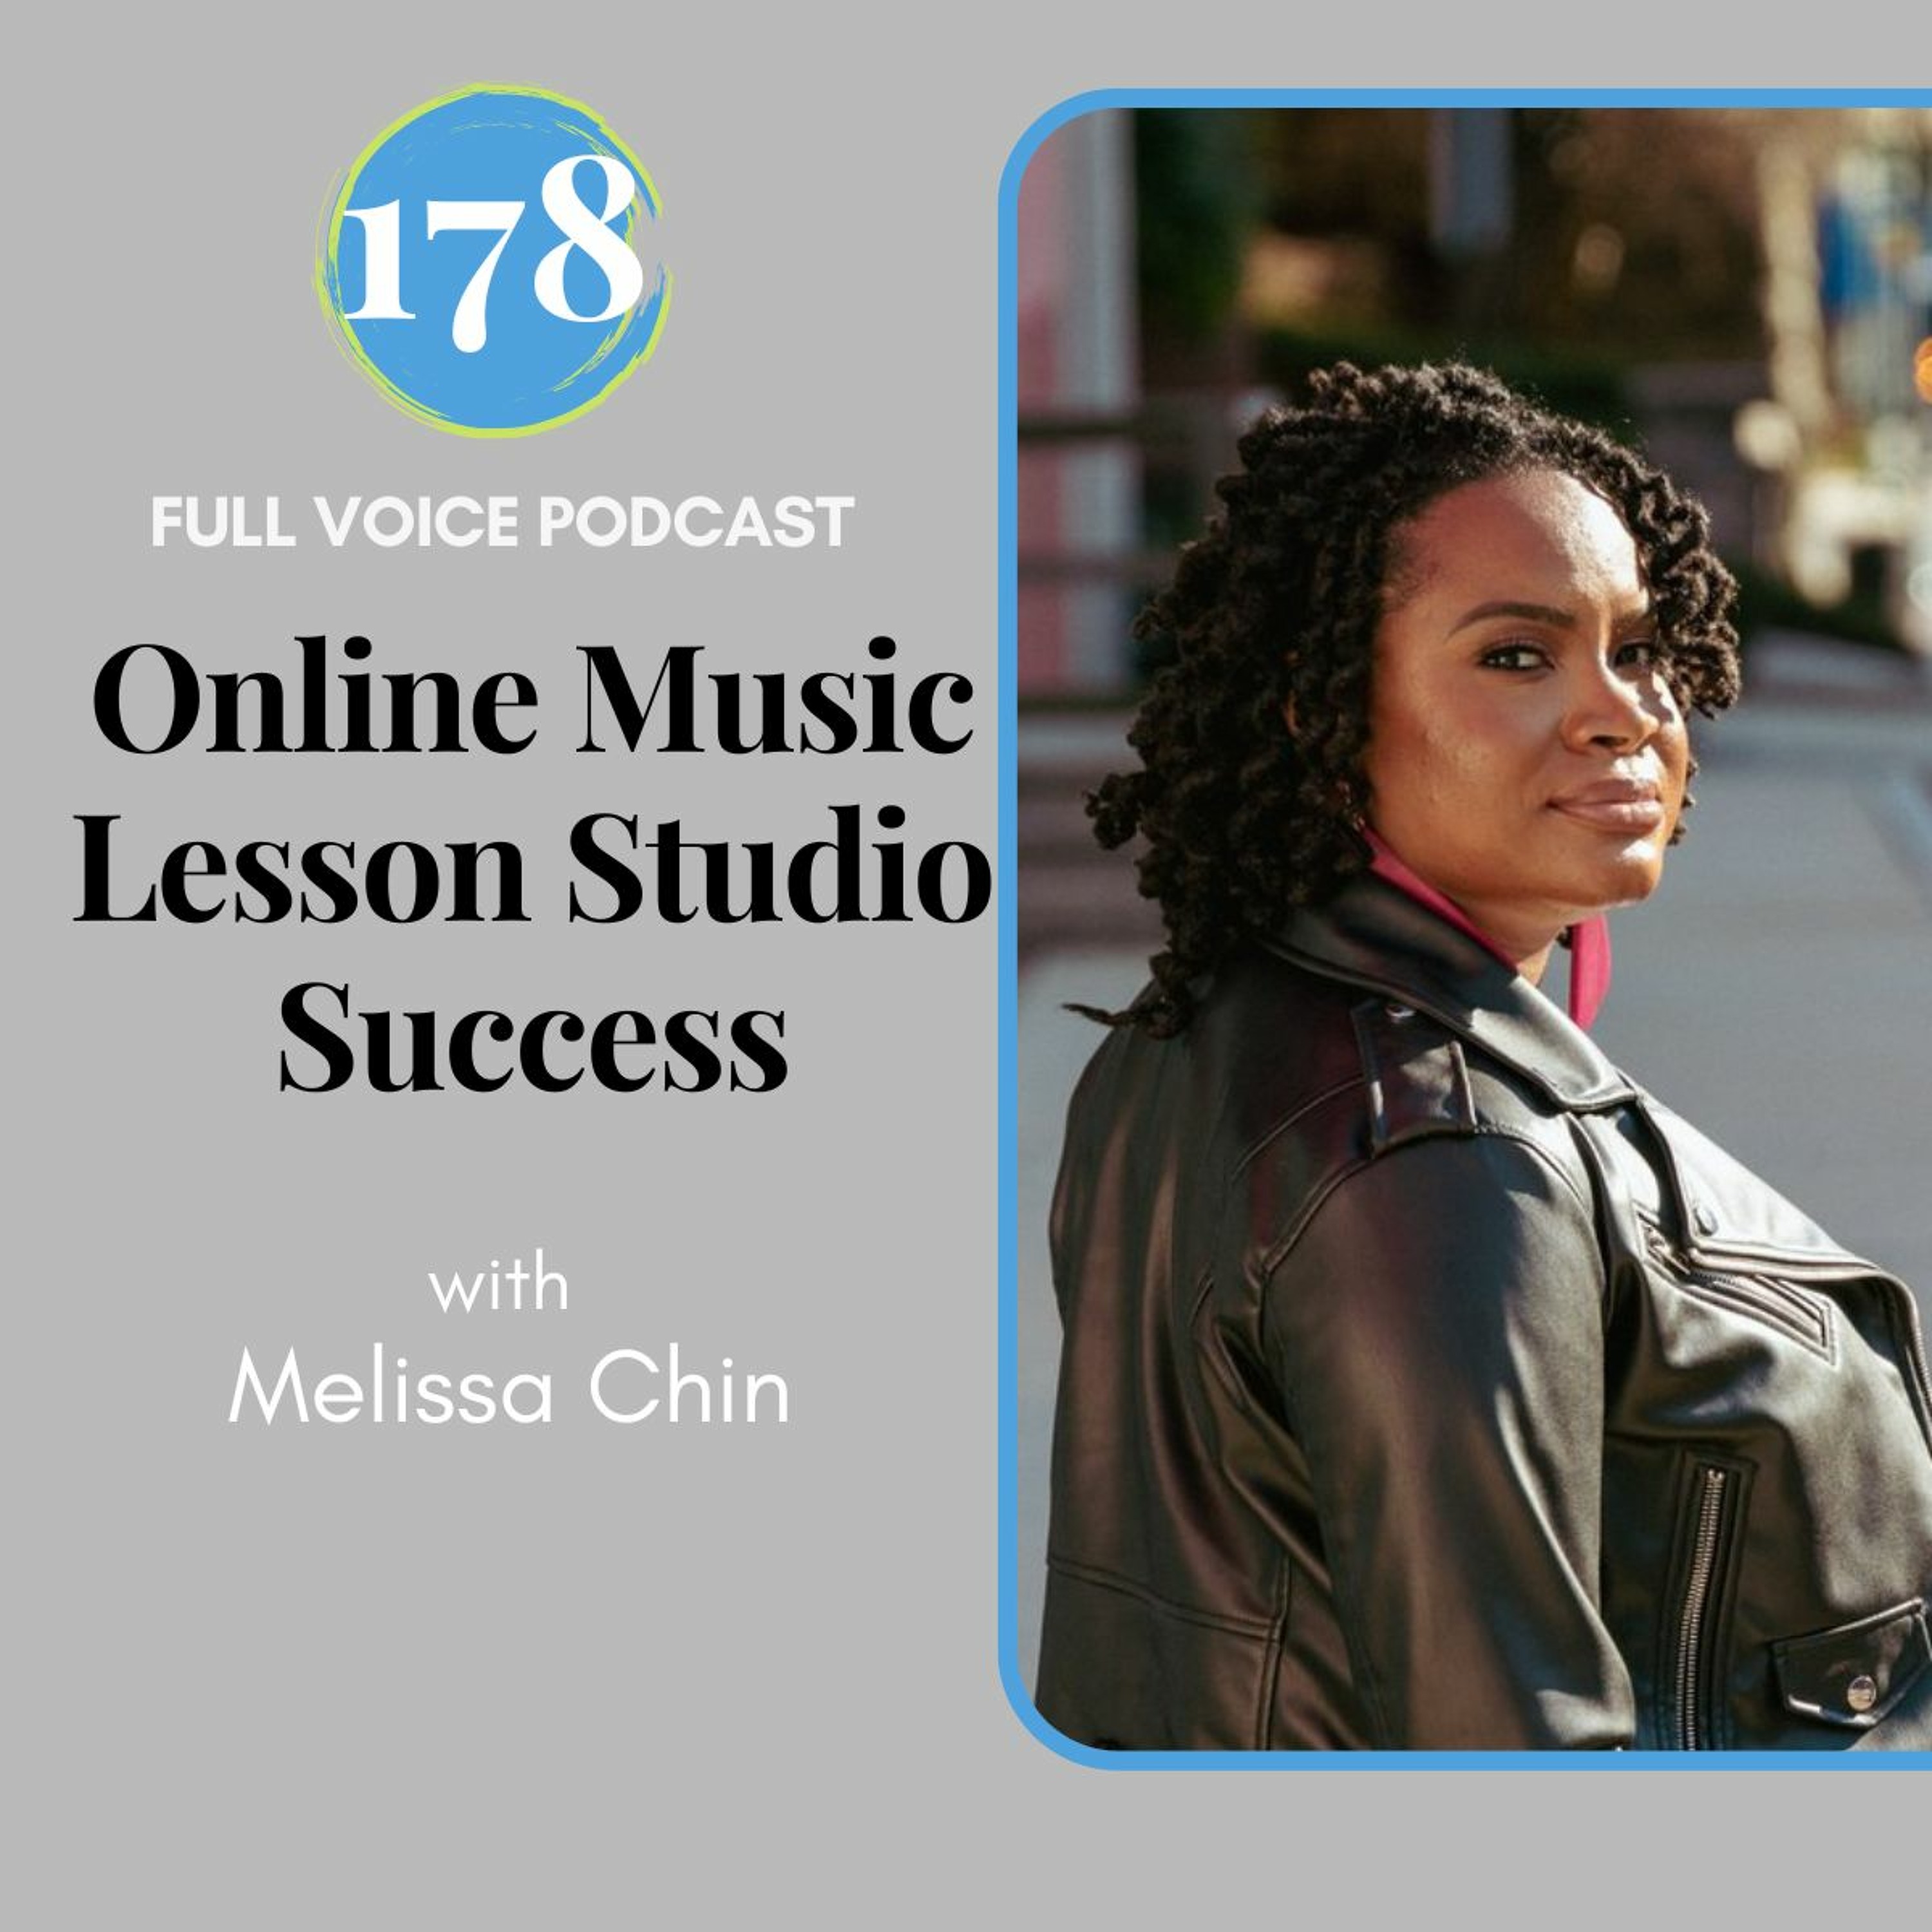 FVPC #178 Online Music Lesson Studio Success with Melissa Chin